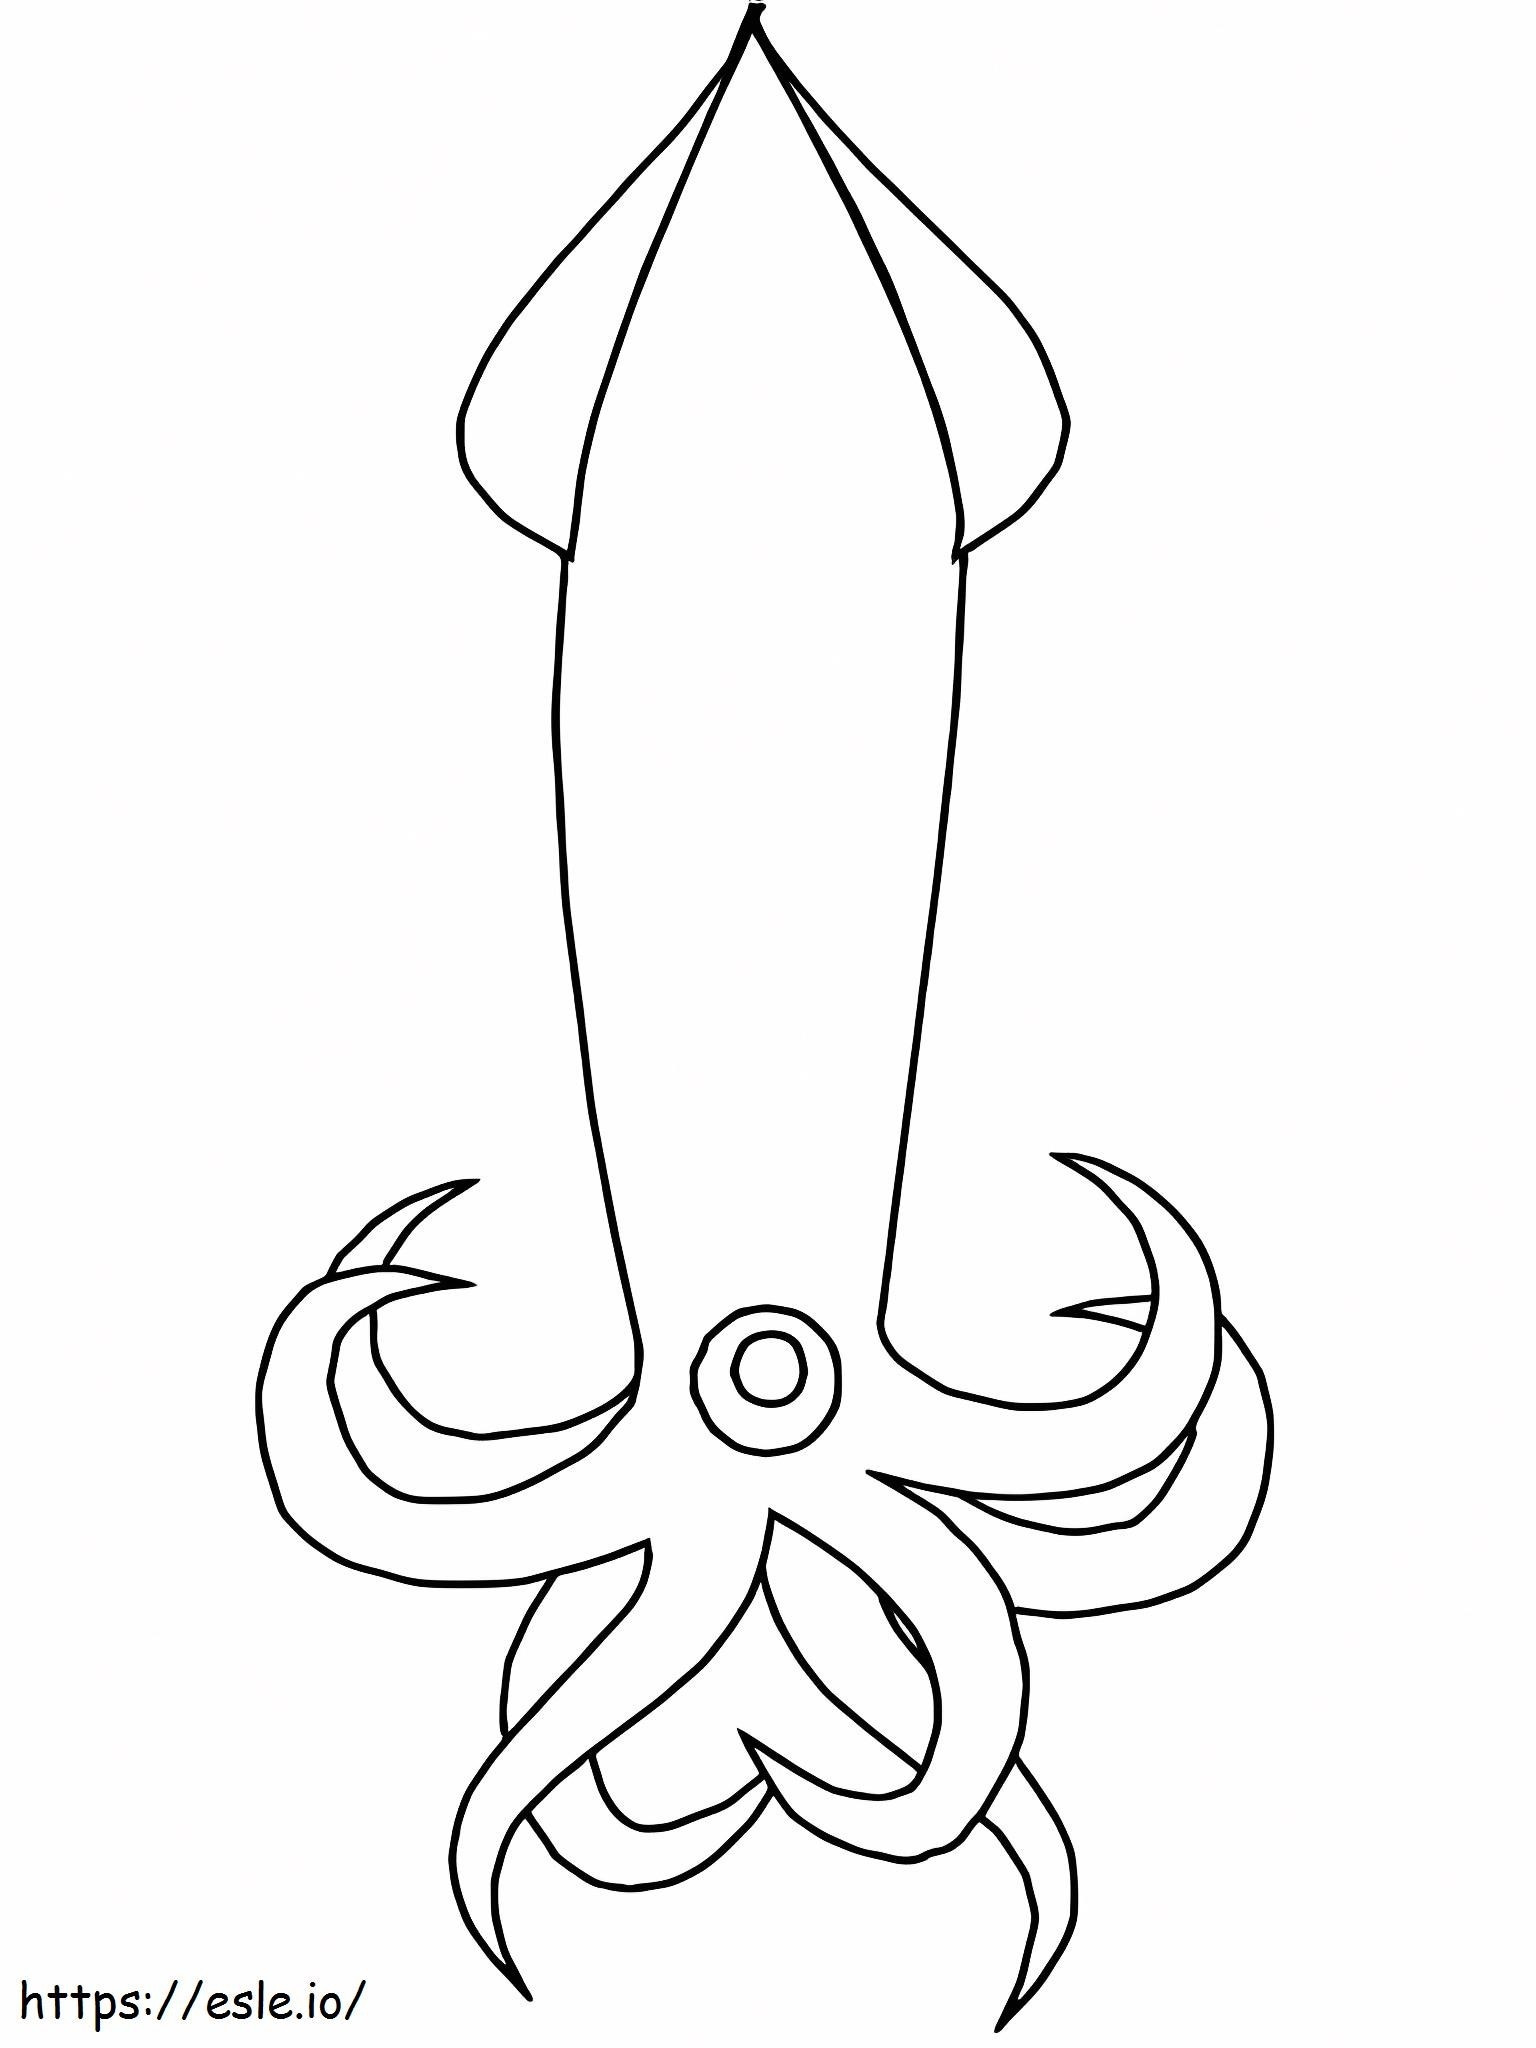 Adorable Squid coloring page